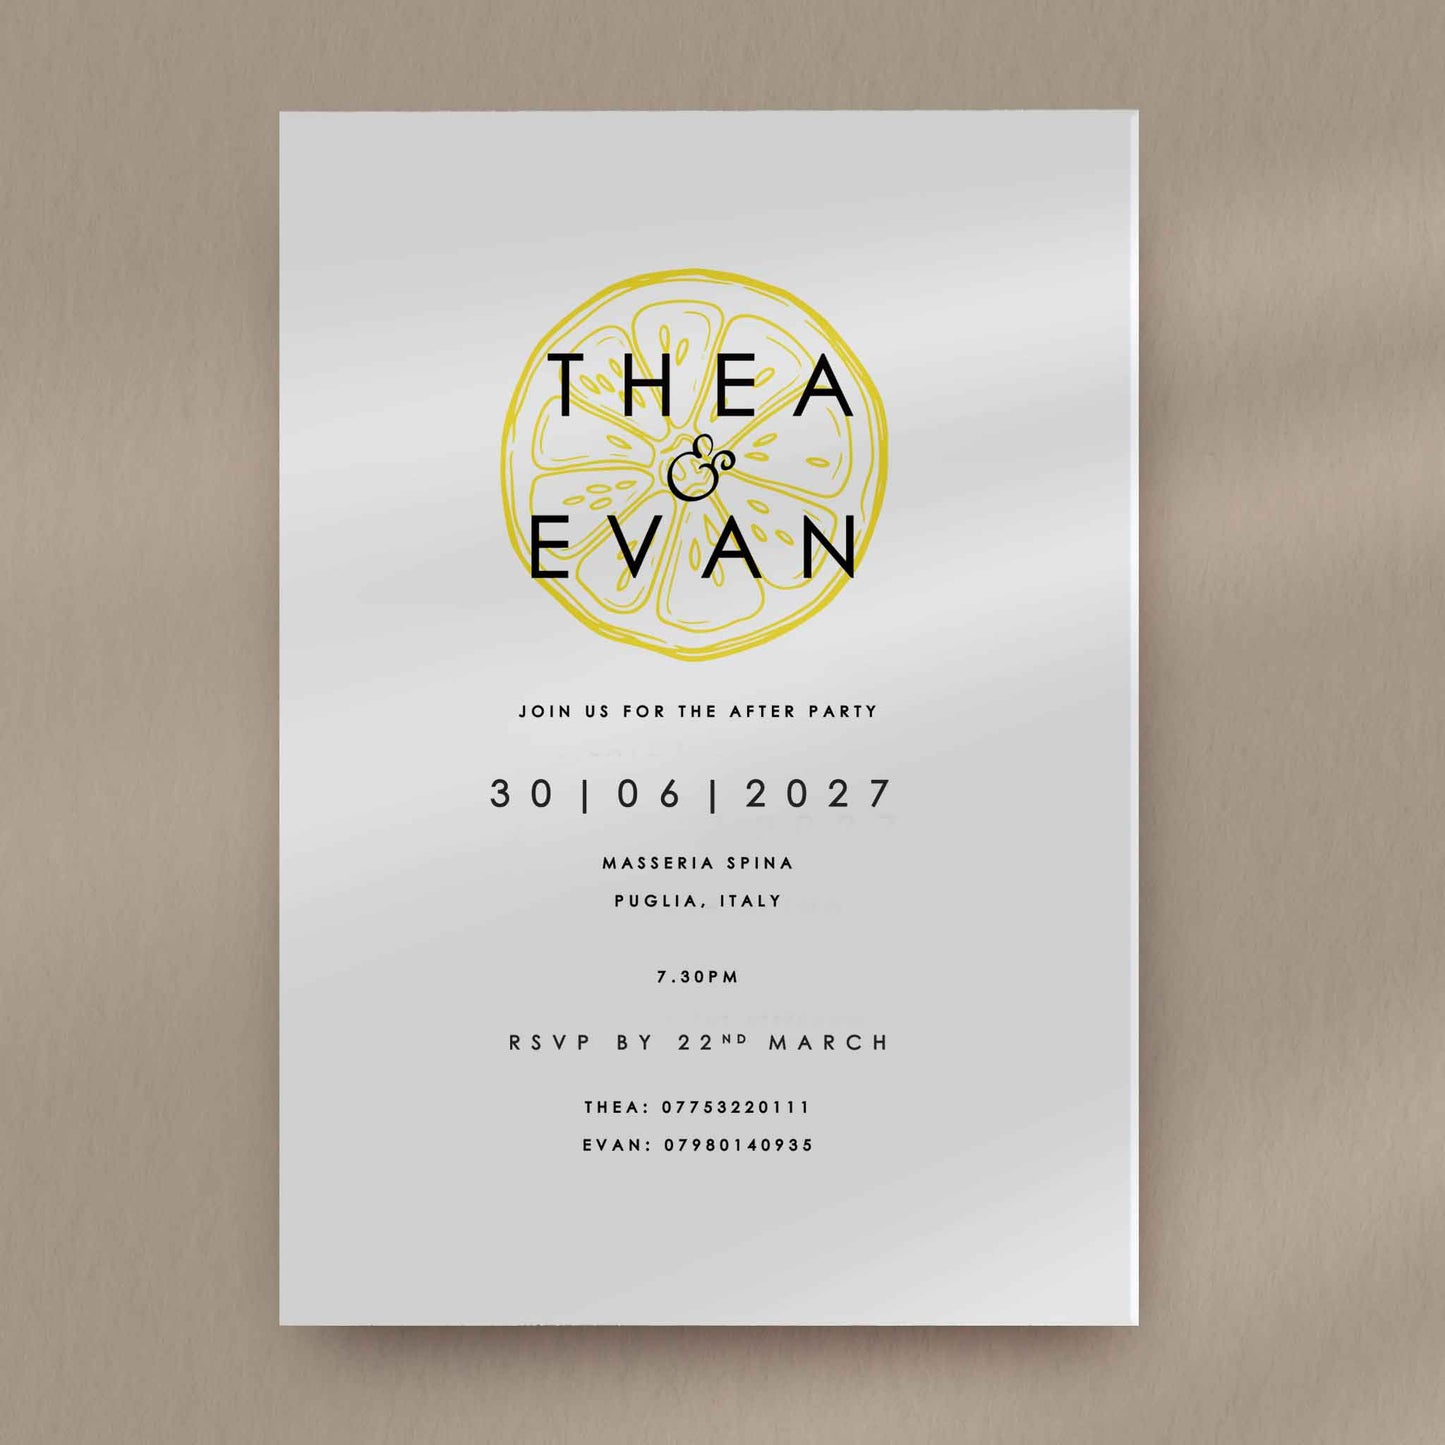 Evening Invitation Sample  Ivy and Gold Wedding Stationery Thea  